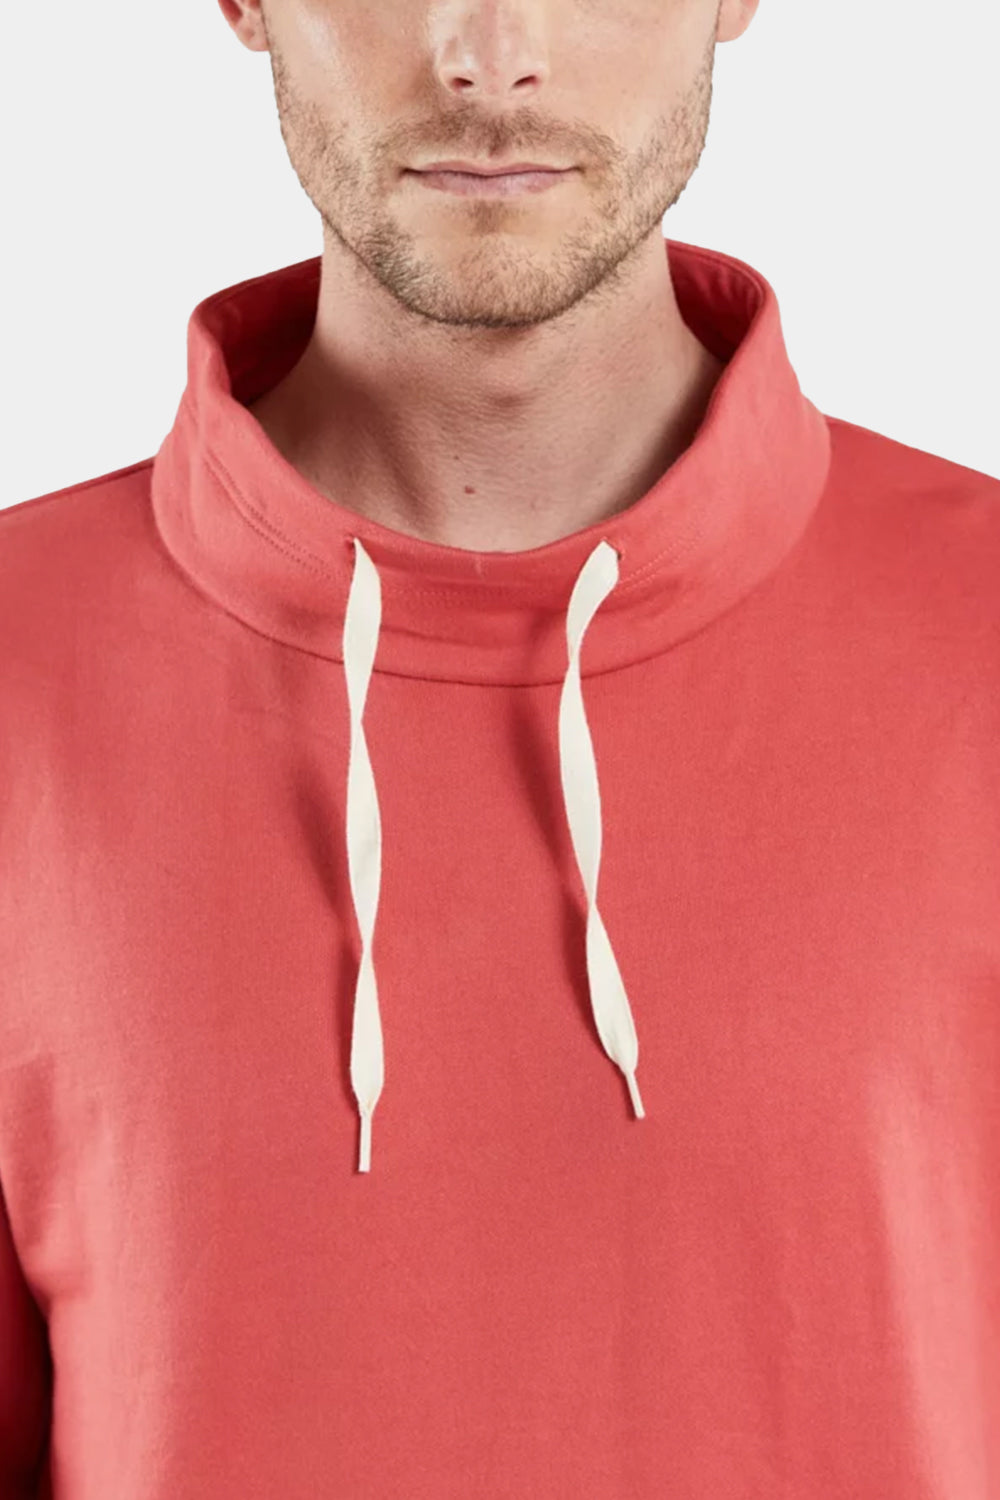 Armor Lux Organic Cotton Sweatshirt Stand-Up Collar (Cranberry Red)